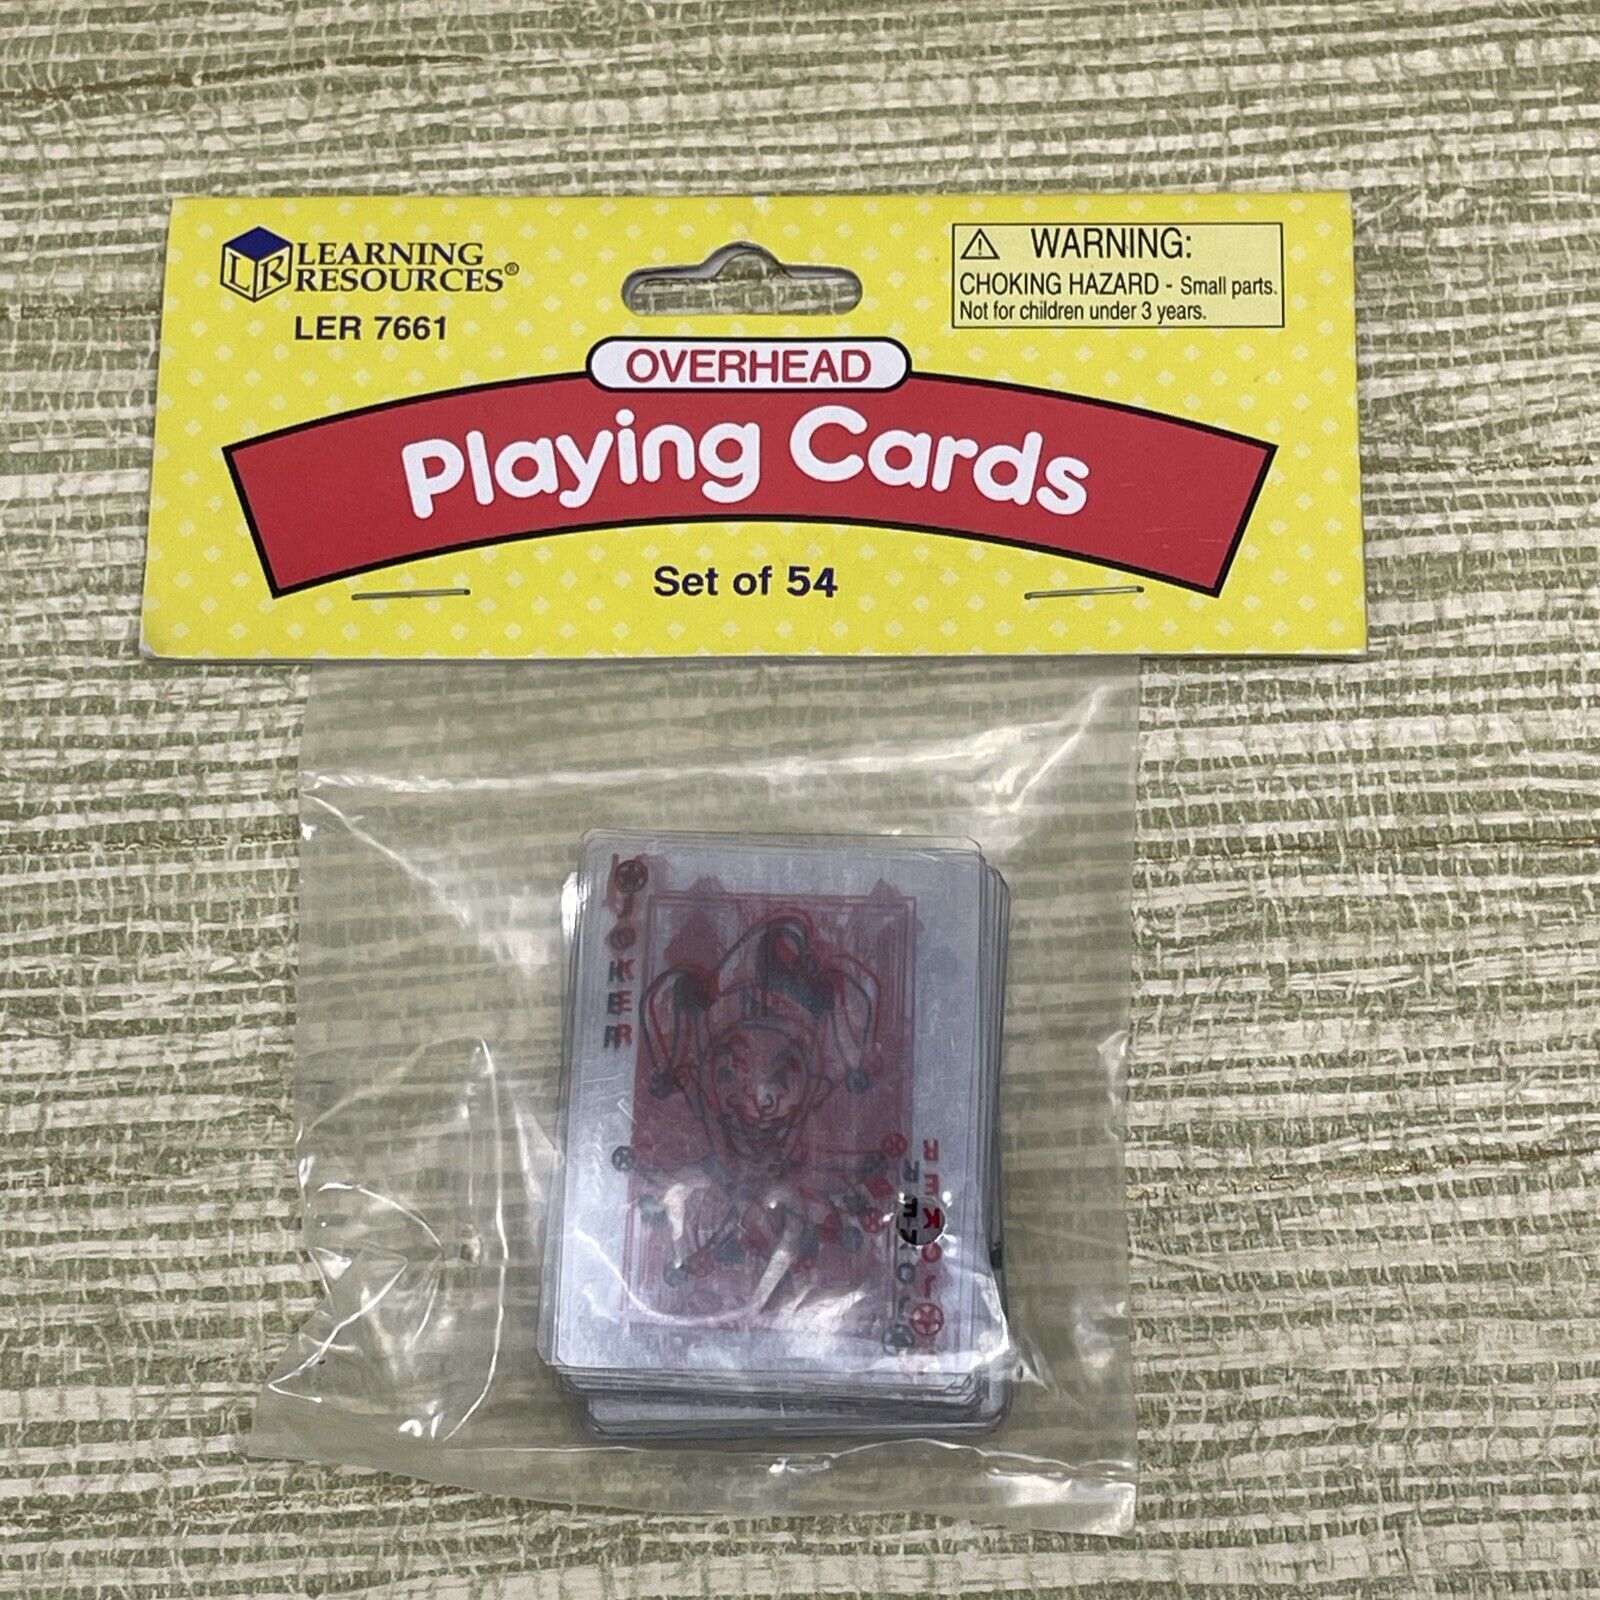 Learning Resources Mini 2” Inch Transparent Overhead Playing Cards NIP Sealed